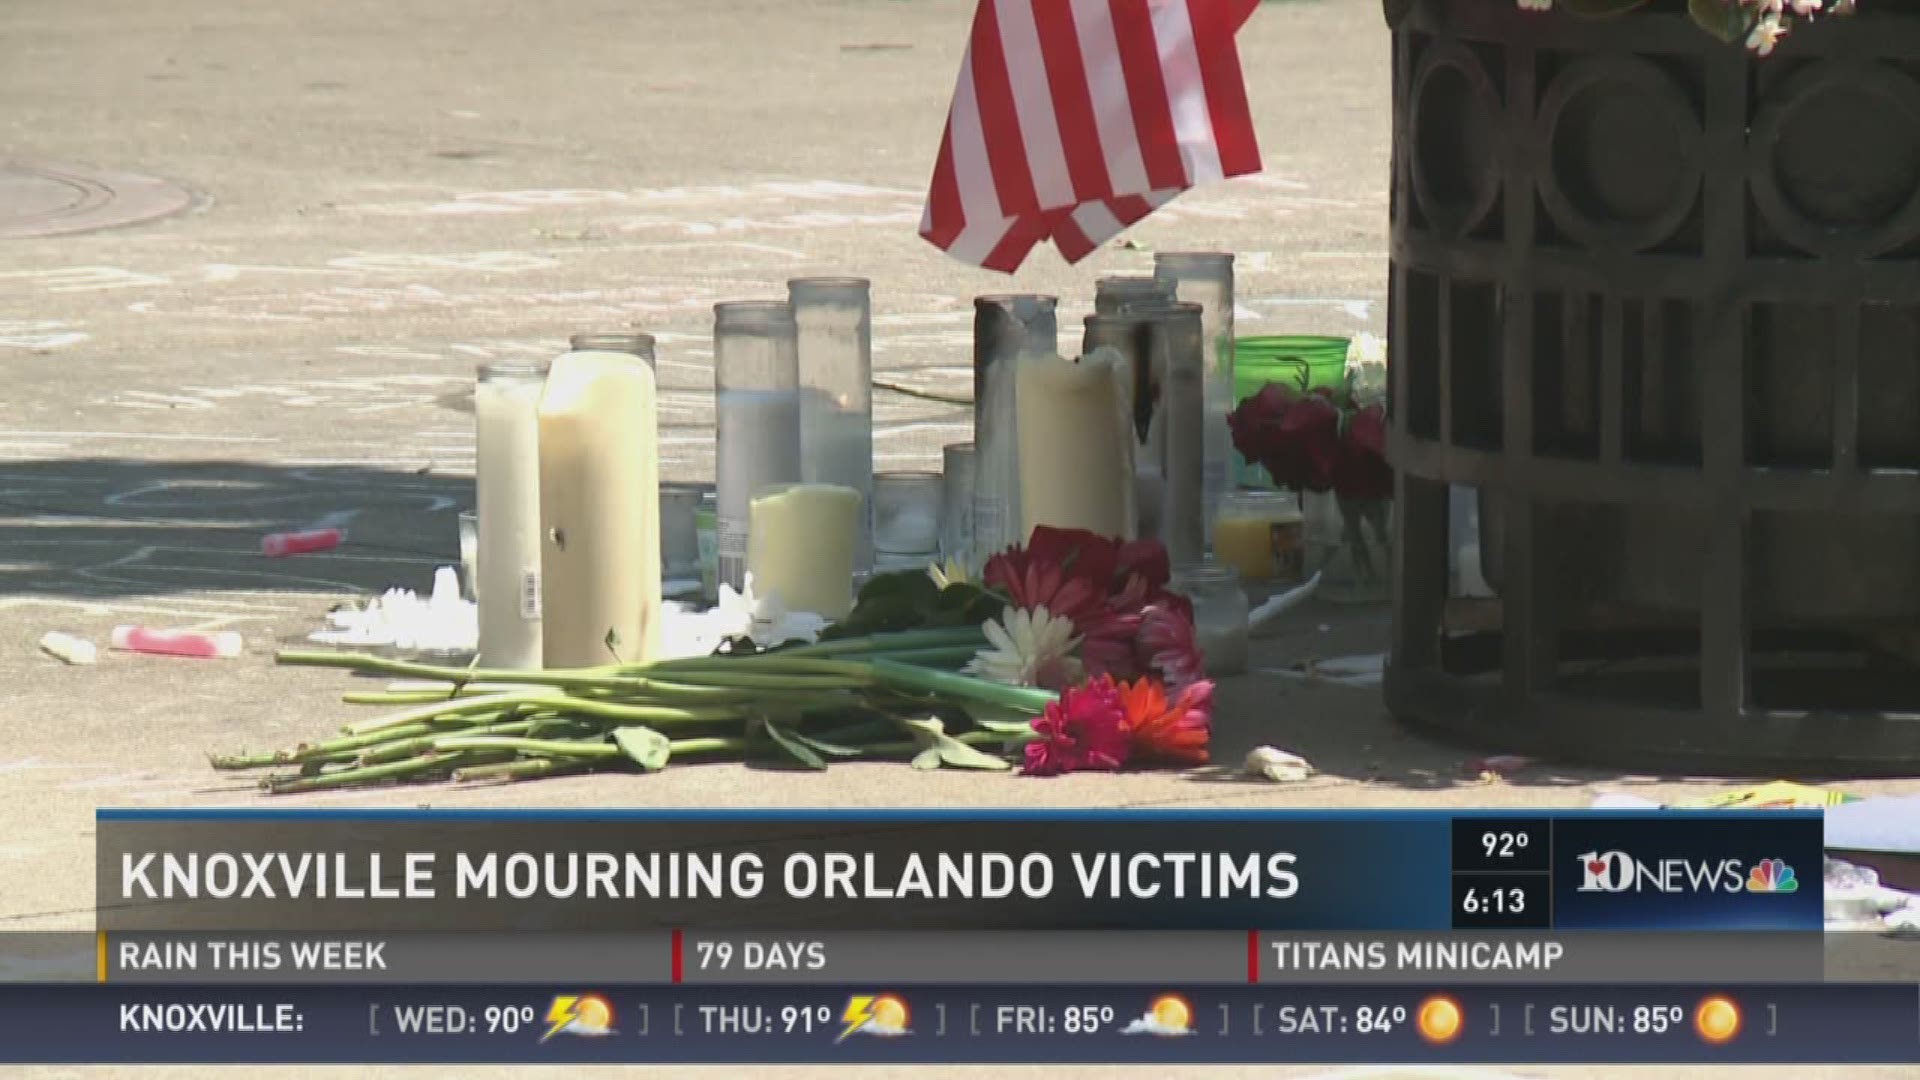 10News reporter Becca Habegger reports on the growing Knoxville memorial for the victims in the Orlando shooting (6/14/16)